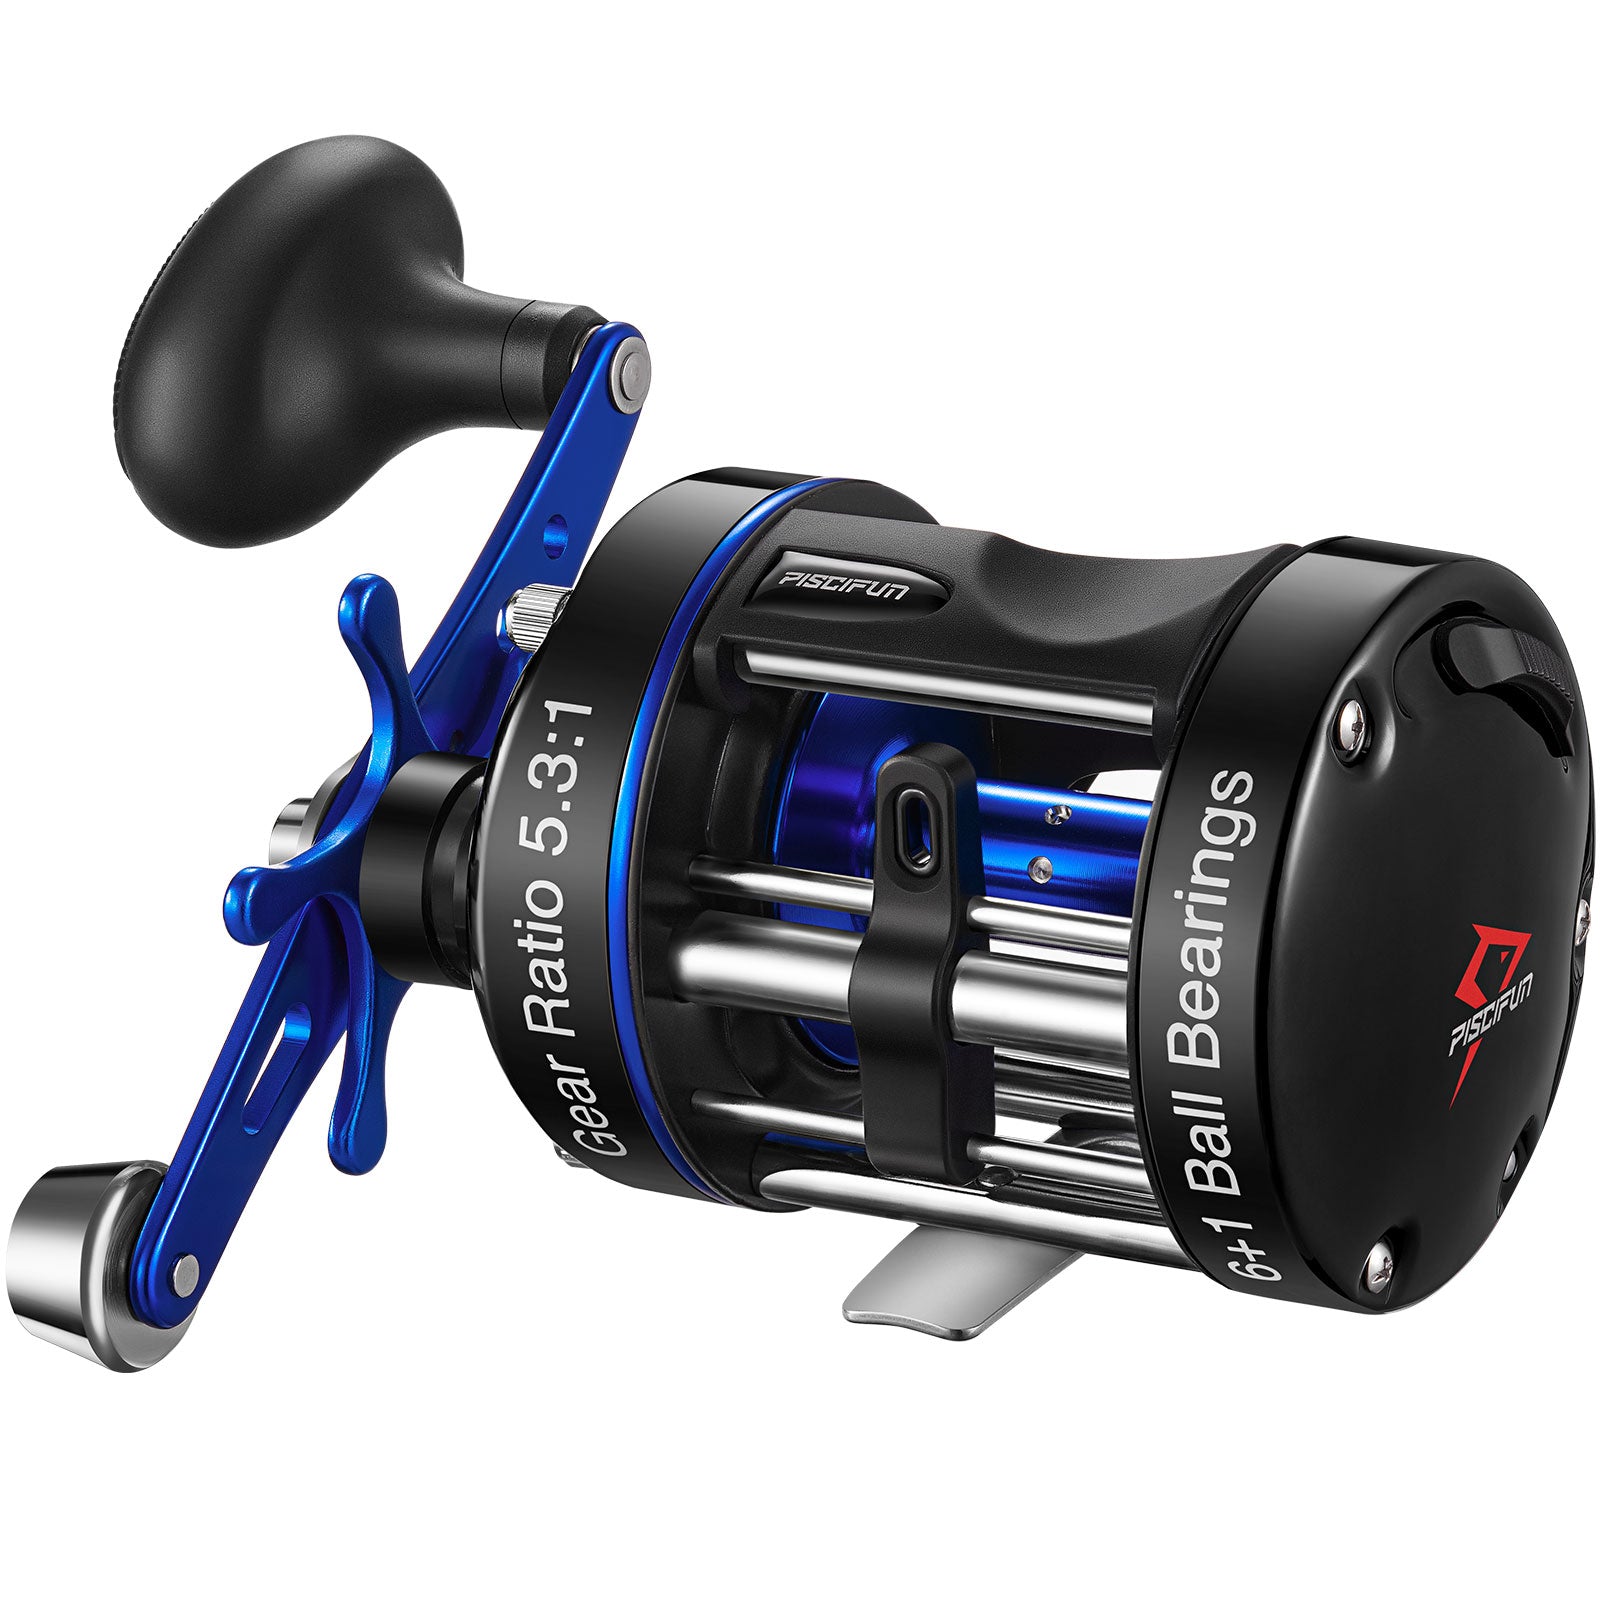 Toadfish Spinning Reel Review (Pros and Cons) 